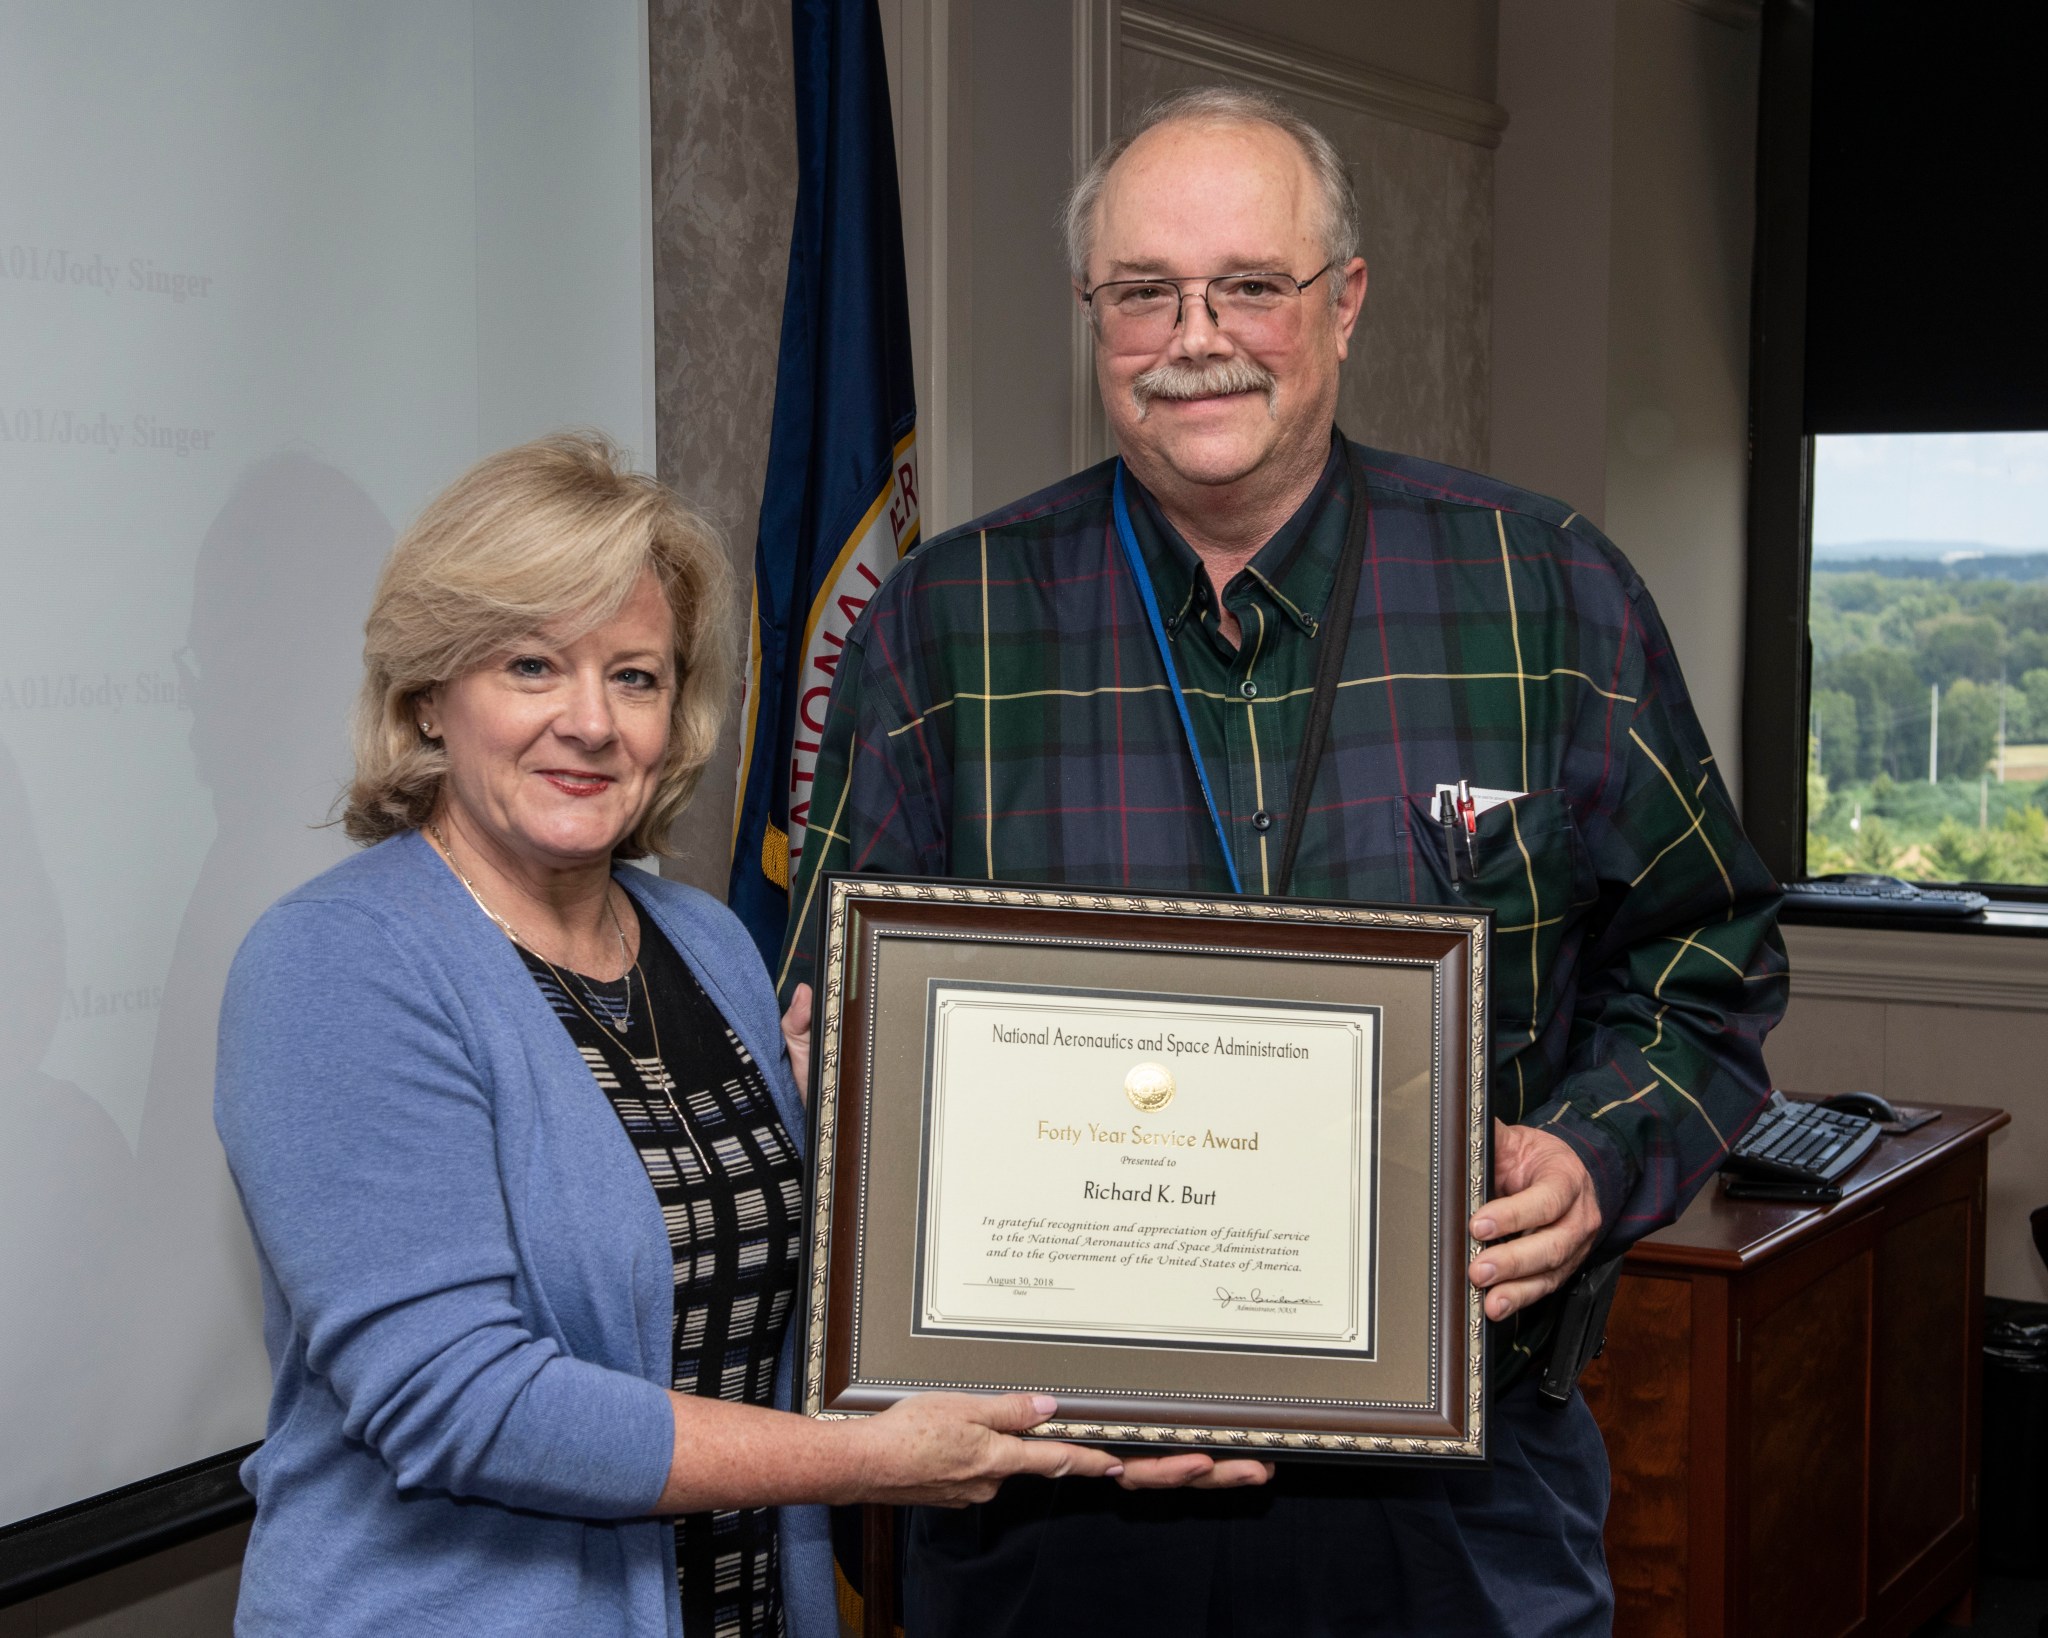 In 2018, Jody Singer, left, presents her future deputy director Rick Burt with a certificate reflecting his decades of service.